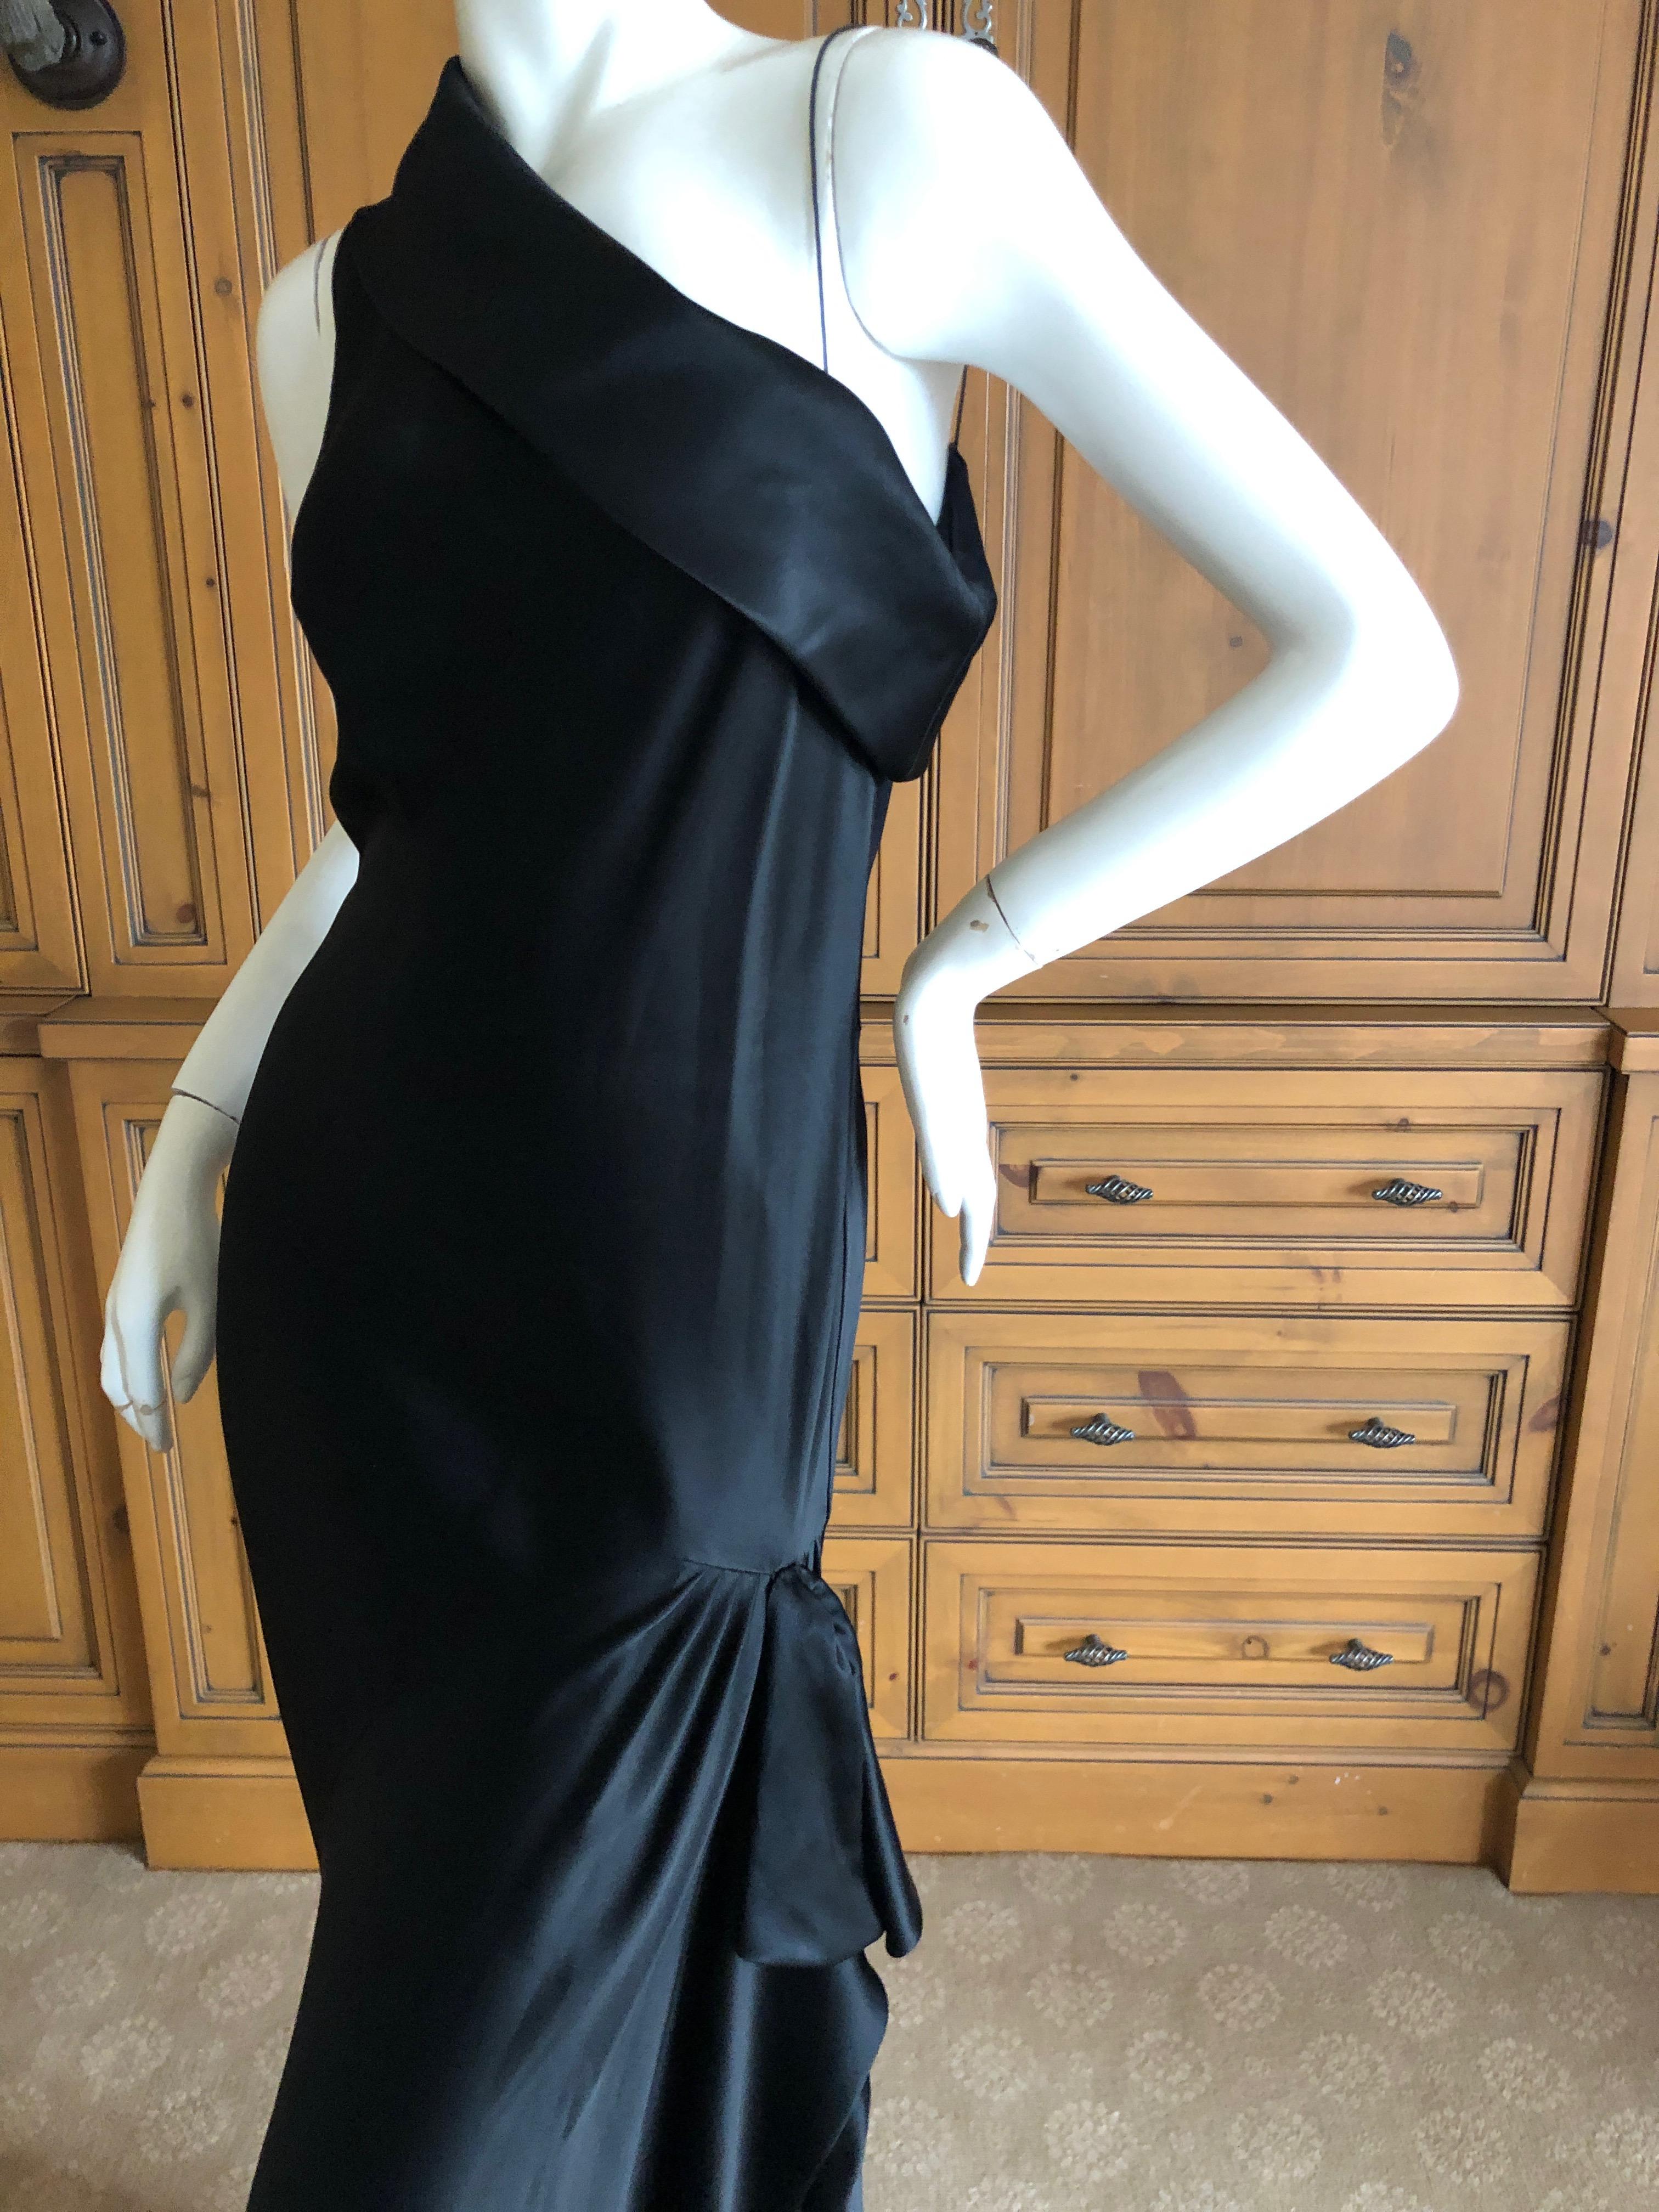 John Galliano Black Bias Cut One Shoulder Draped 1990's Evening Dress.
So pretty, nobody cut's like Galliano, this clings in just the right places.
Size 40 French  8 US
 Bust 38